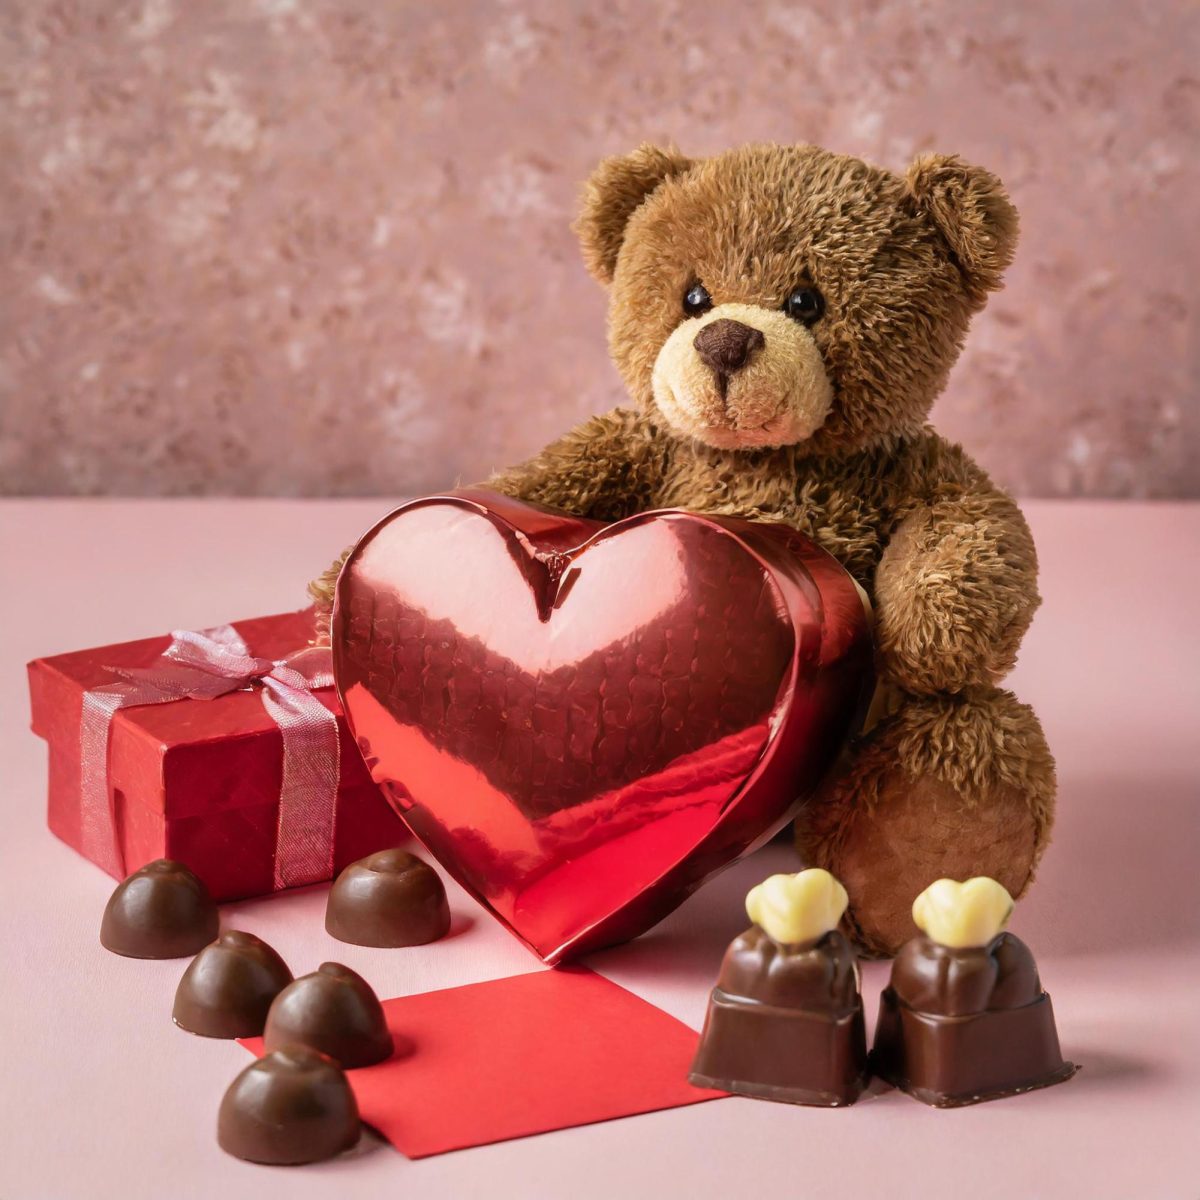 What gift should you get your valentine?